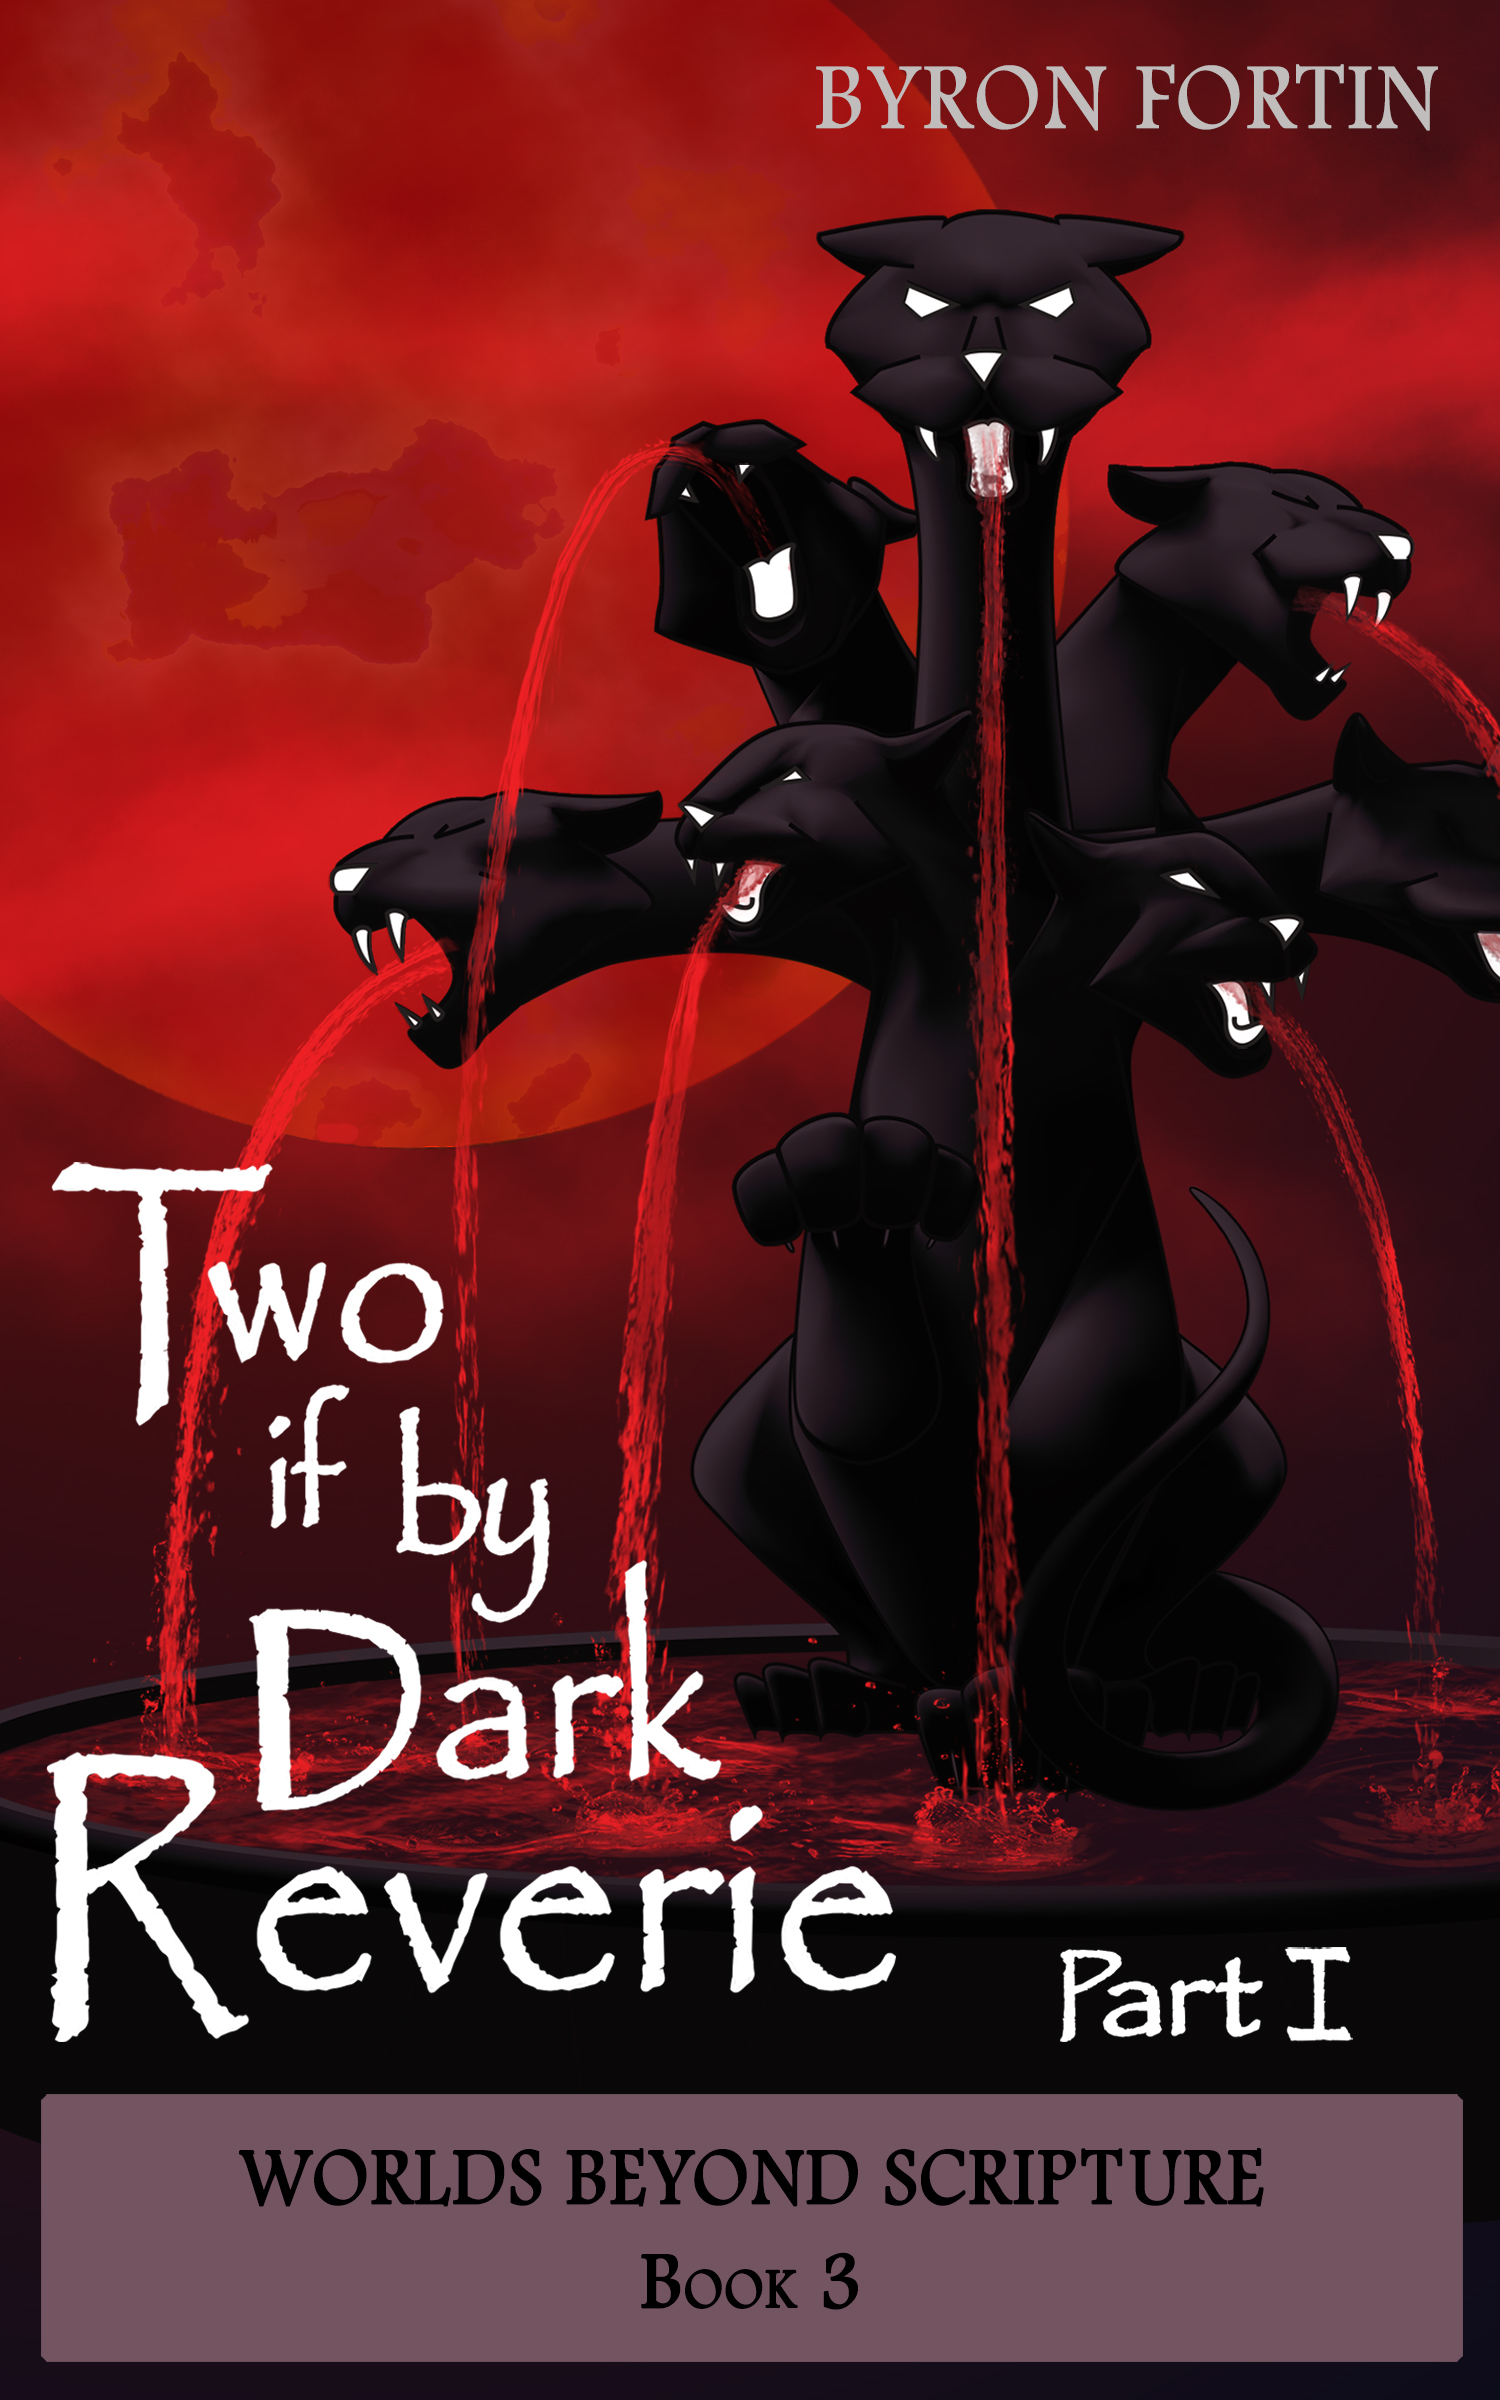 FREE: Two if by Dark Reverie: Part I (Worlds Beyond Scripture Book 3) by Byron Fortin